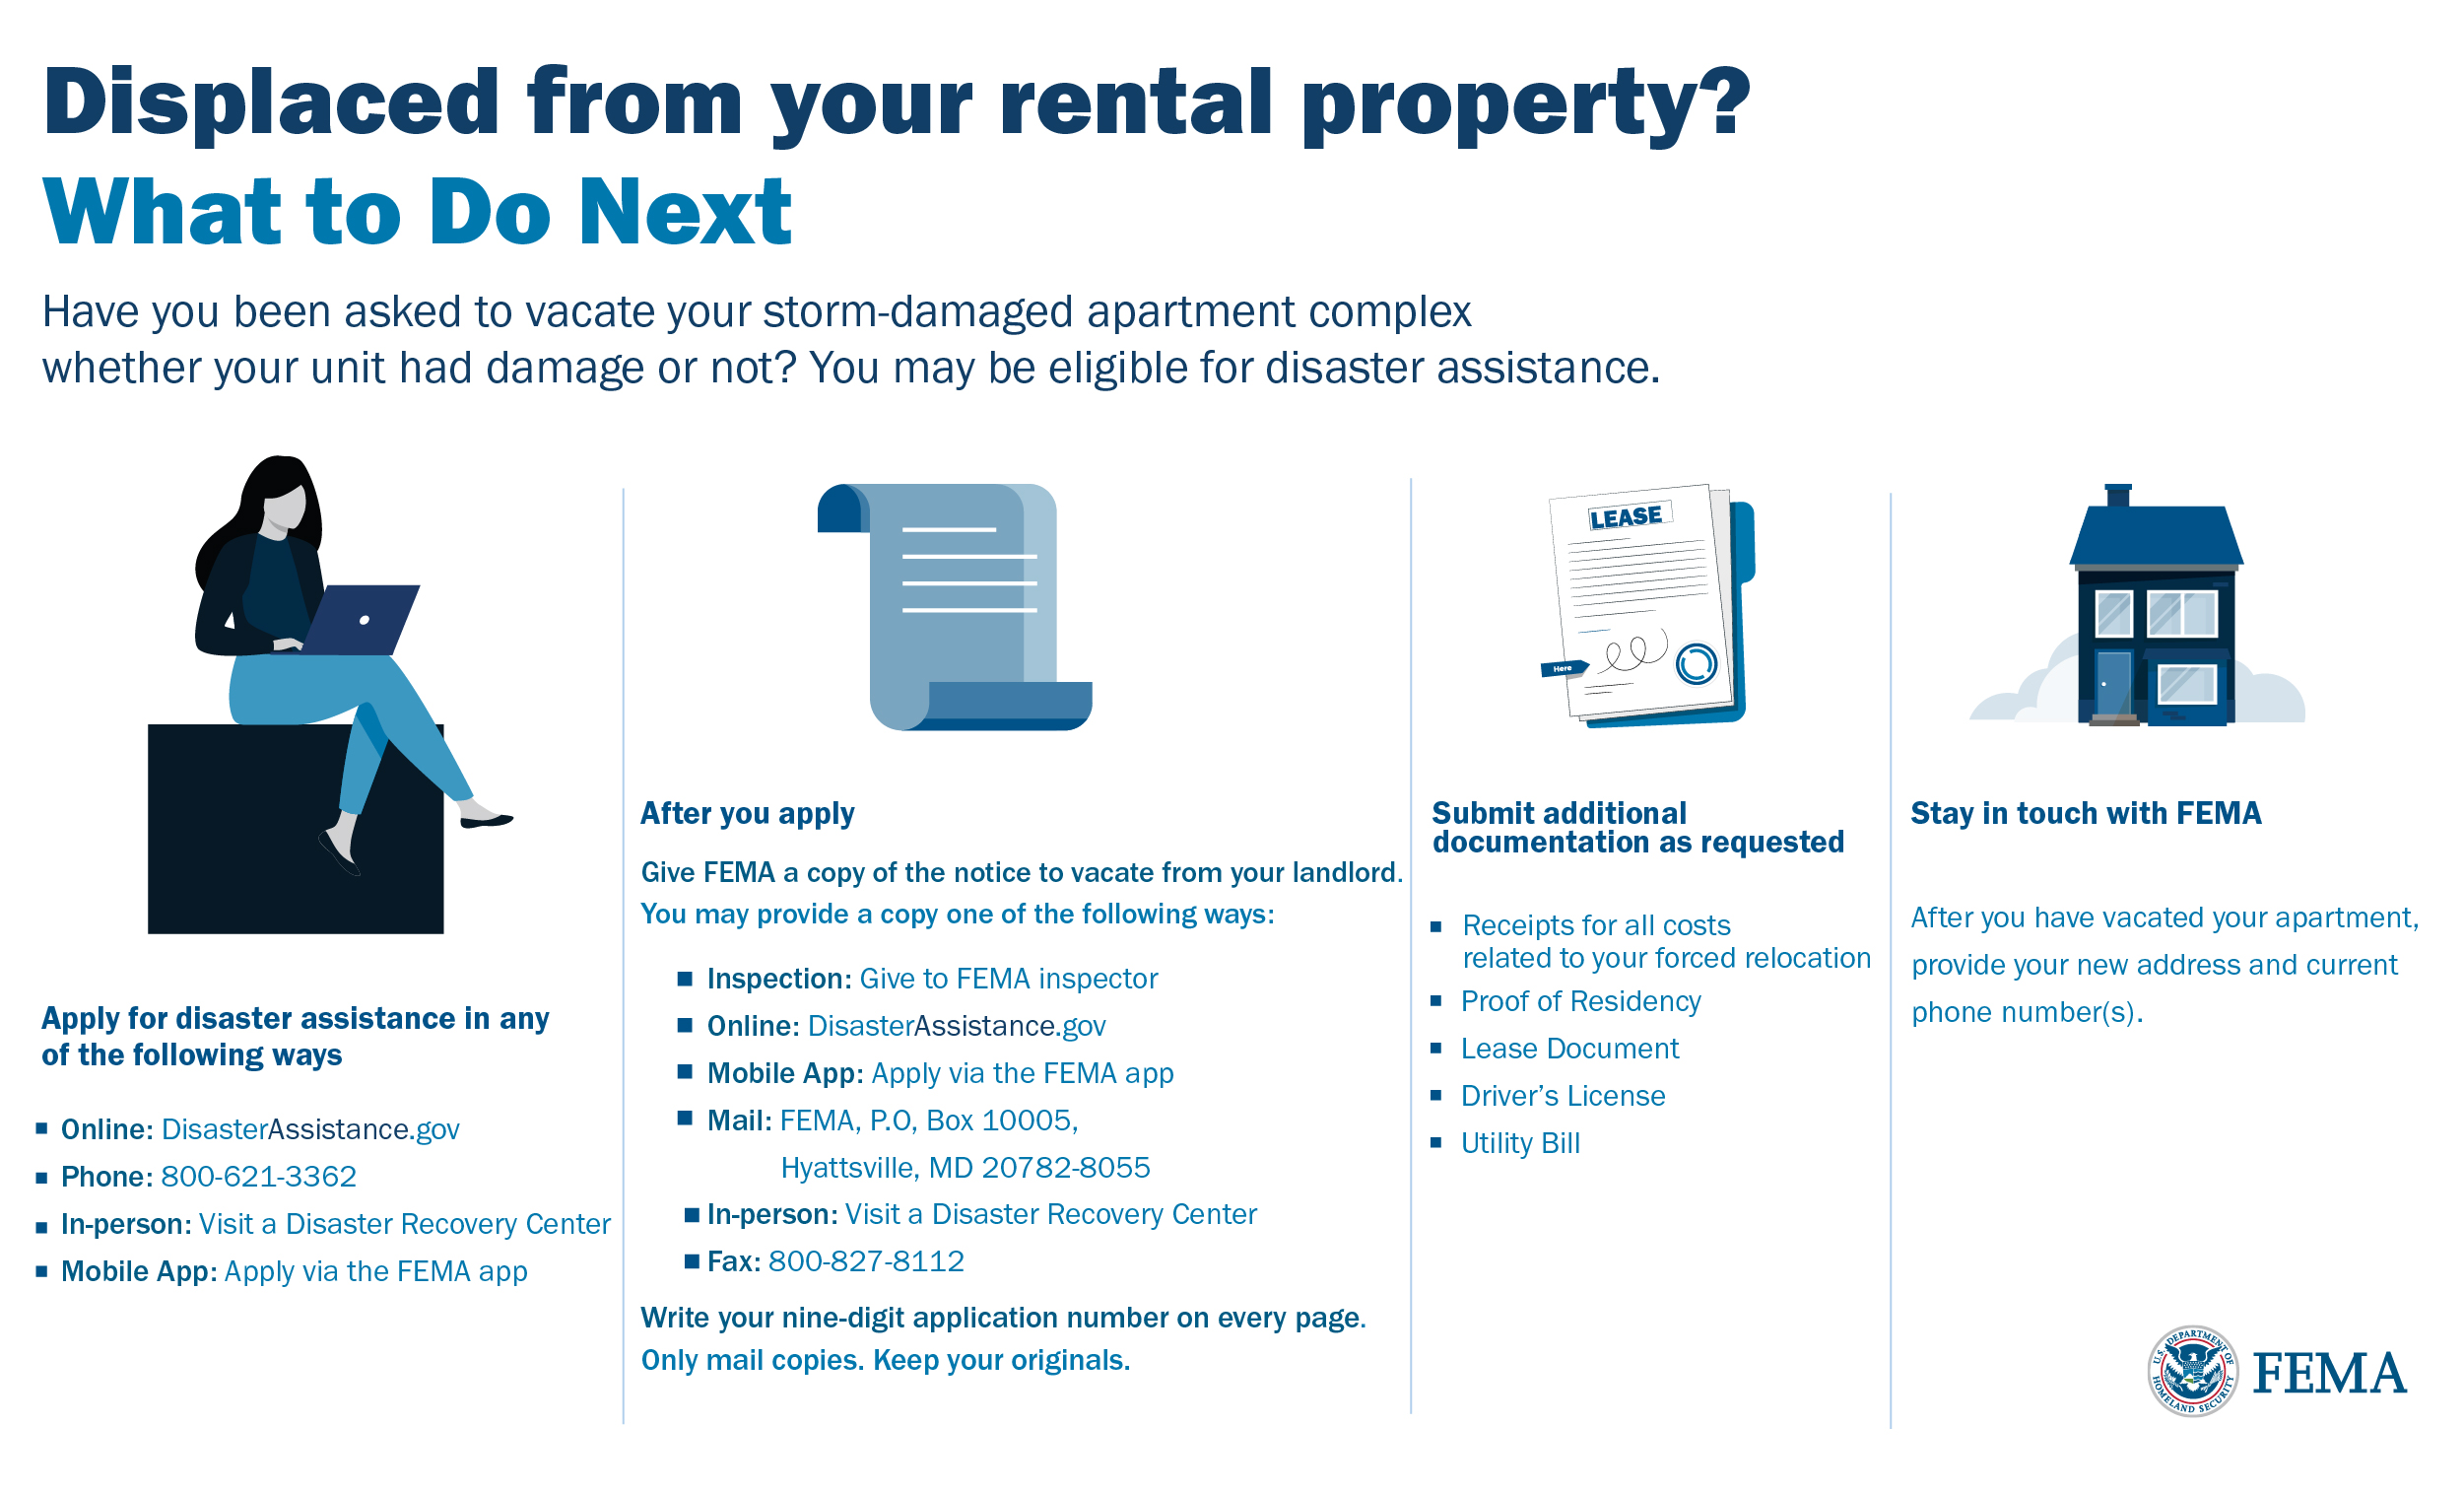 Displaced From Your Rental Property Graphic